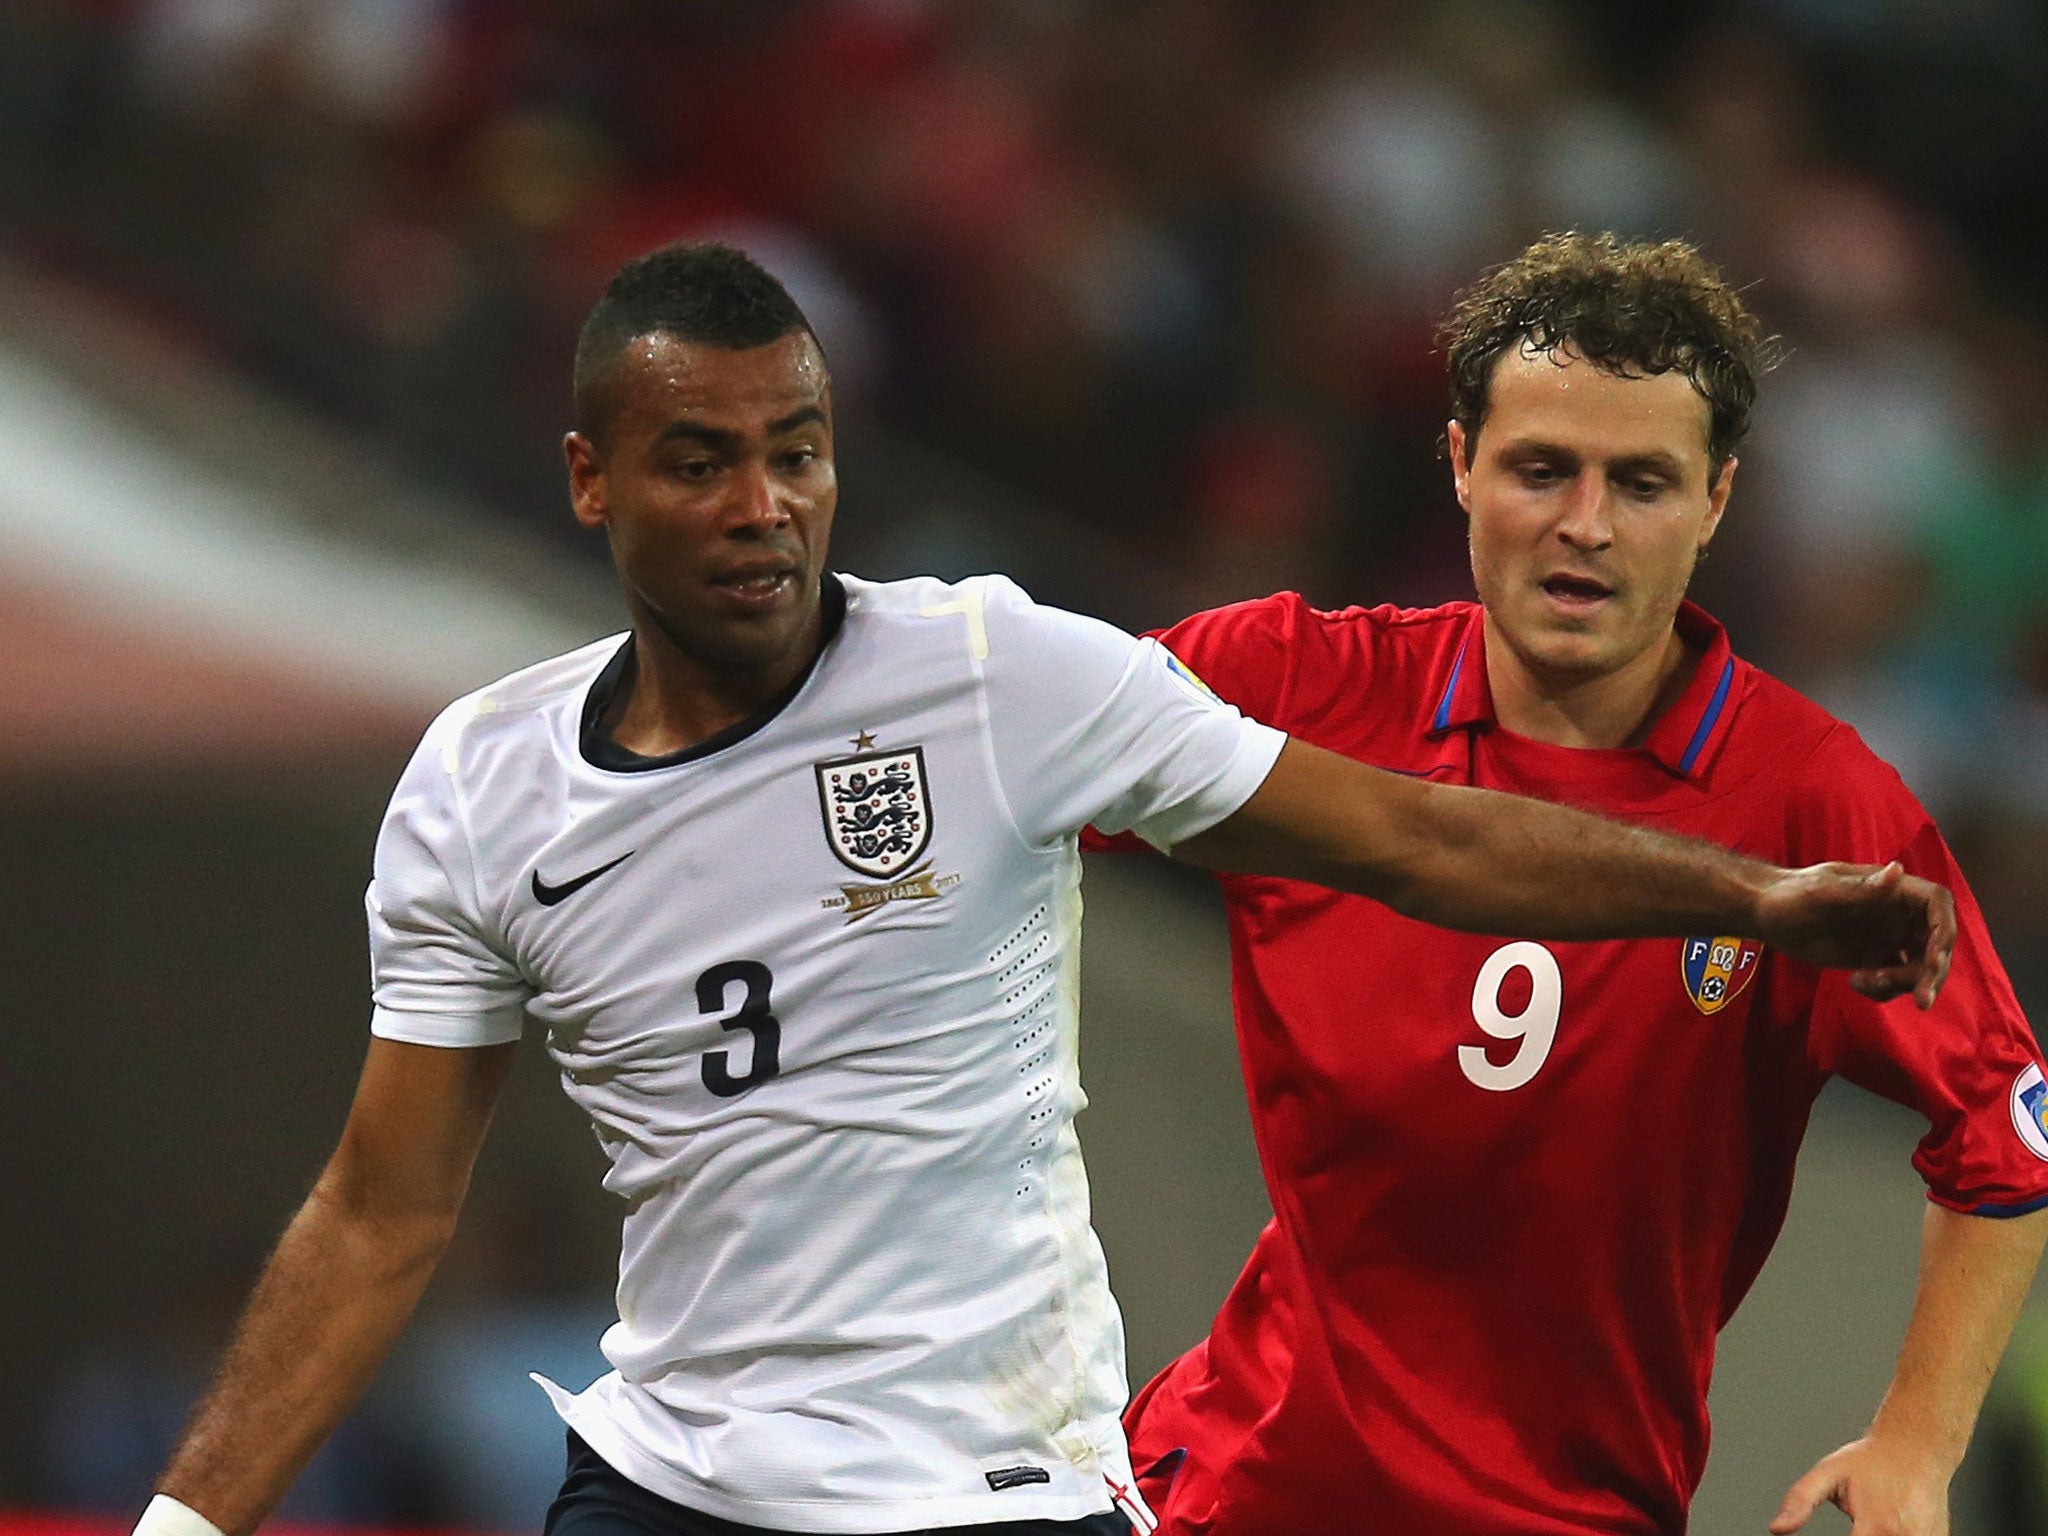 Ashley Cole, left: Chelsea player has a rib injury which he aggravated on Sunday